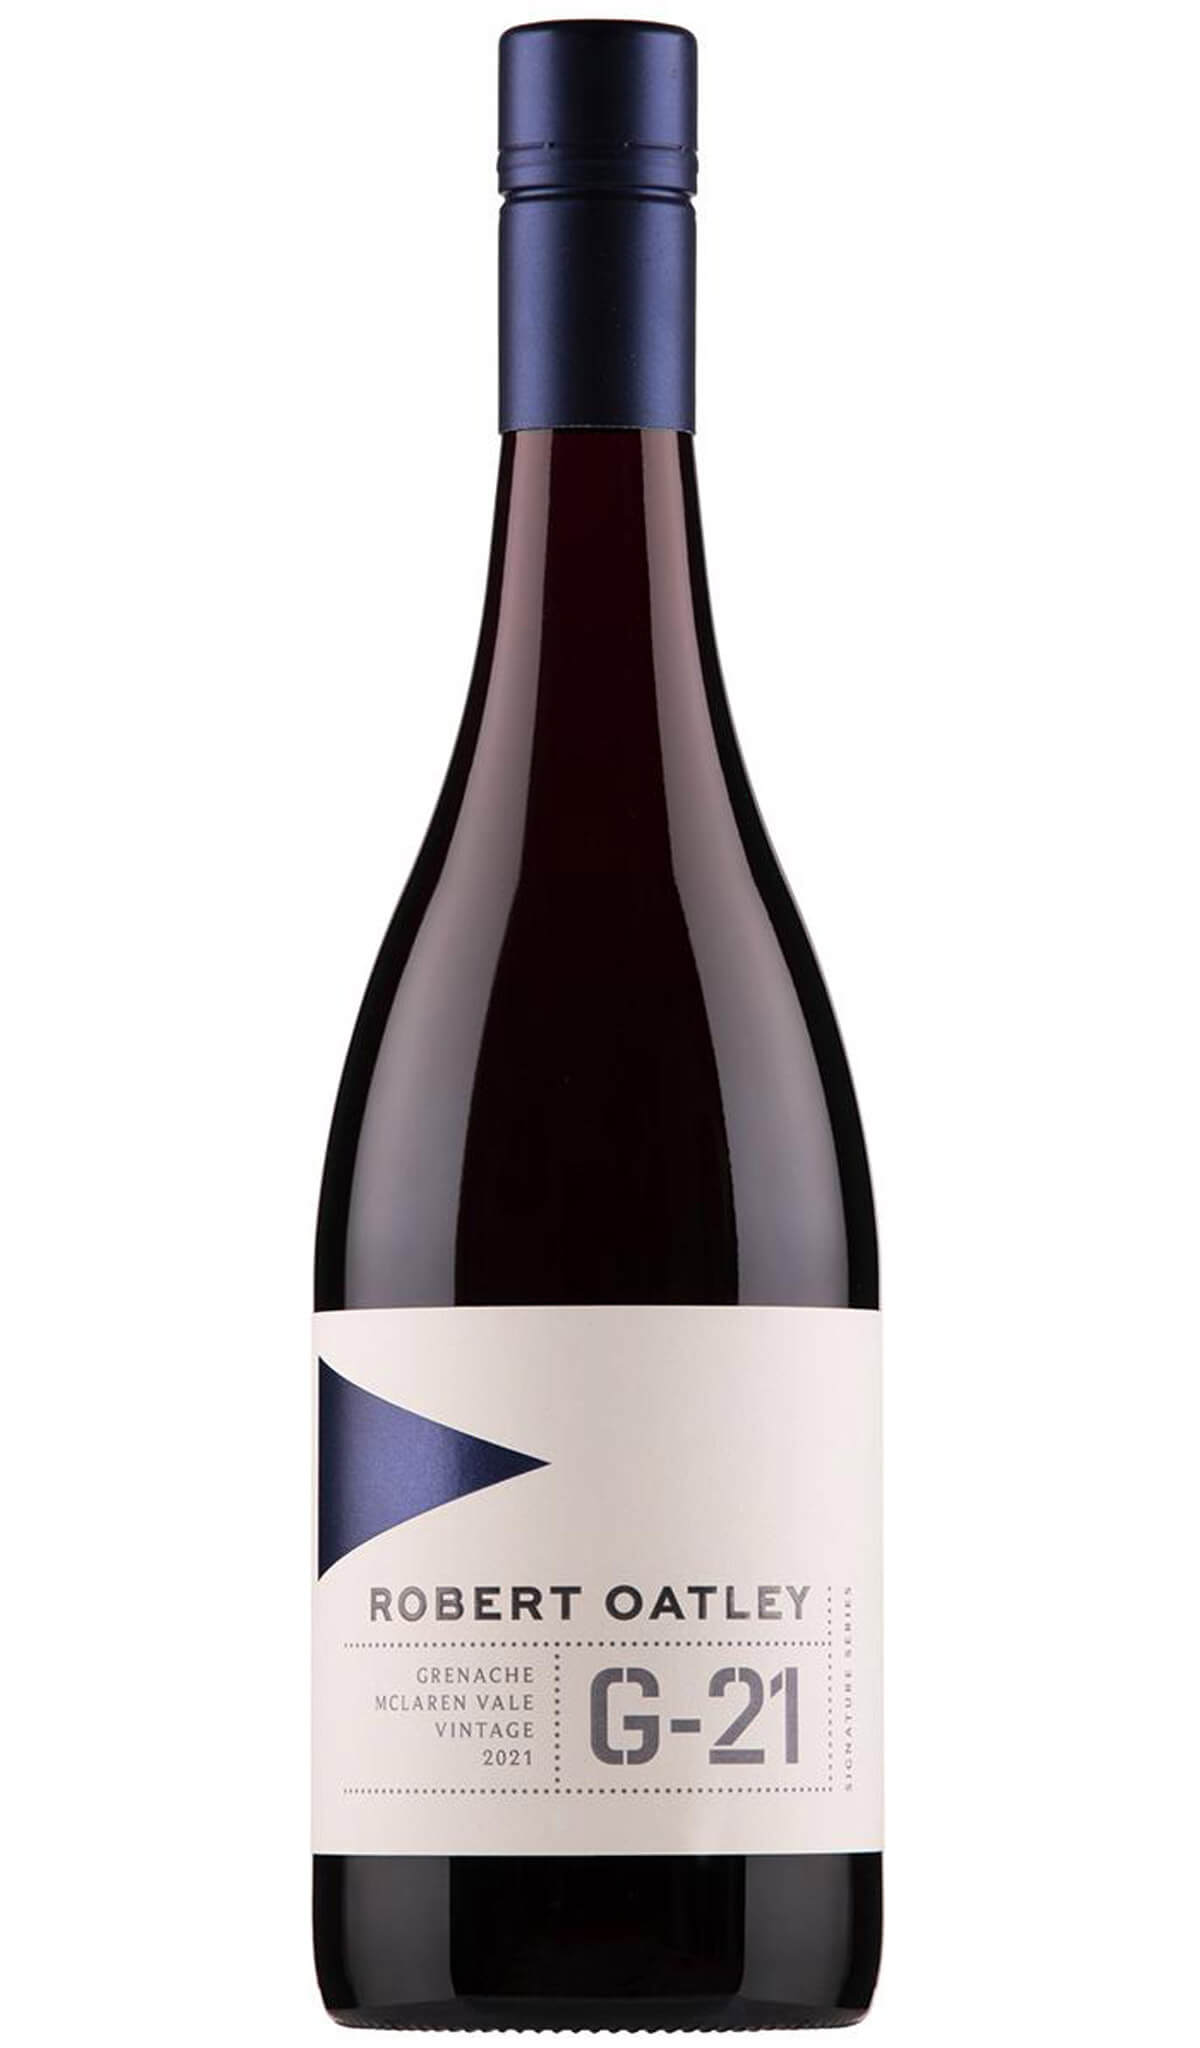 Find out more or purchase Robert Oatley Grenache G-21 2021 (McLaren Vale) online at Wine Sellers Direct - Australia's independent liquor specialists.